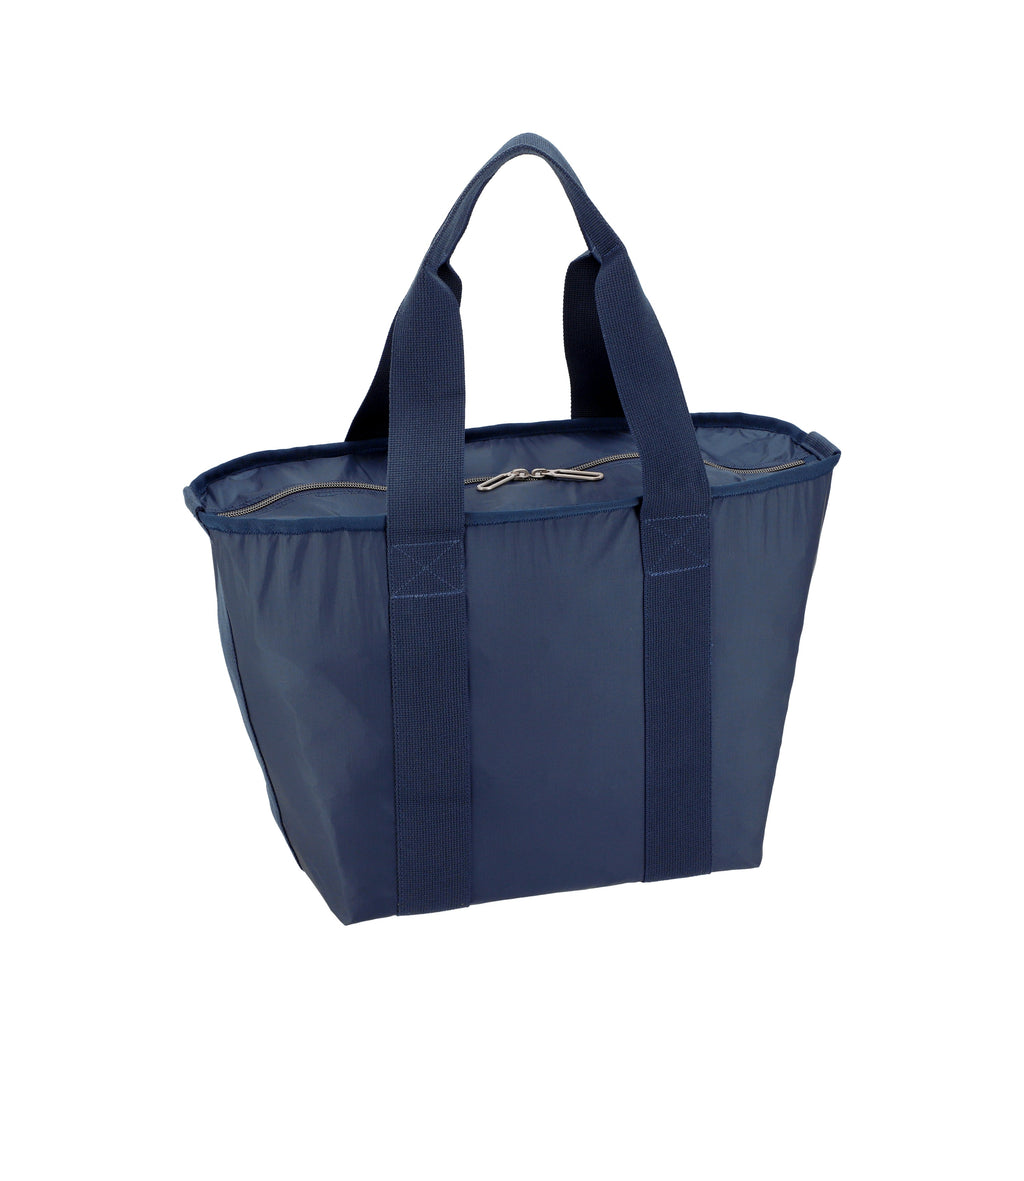 Essential East/West Tote - 24642702442544